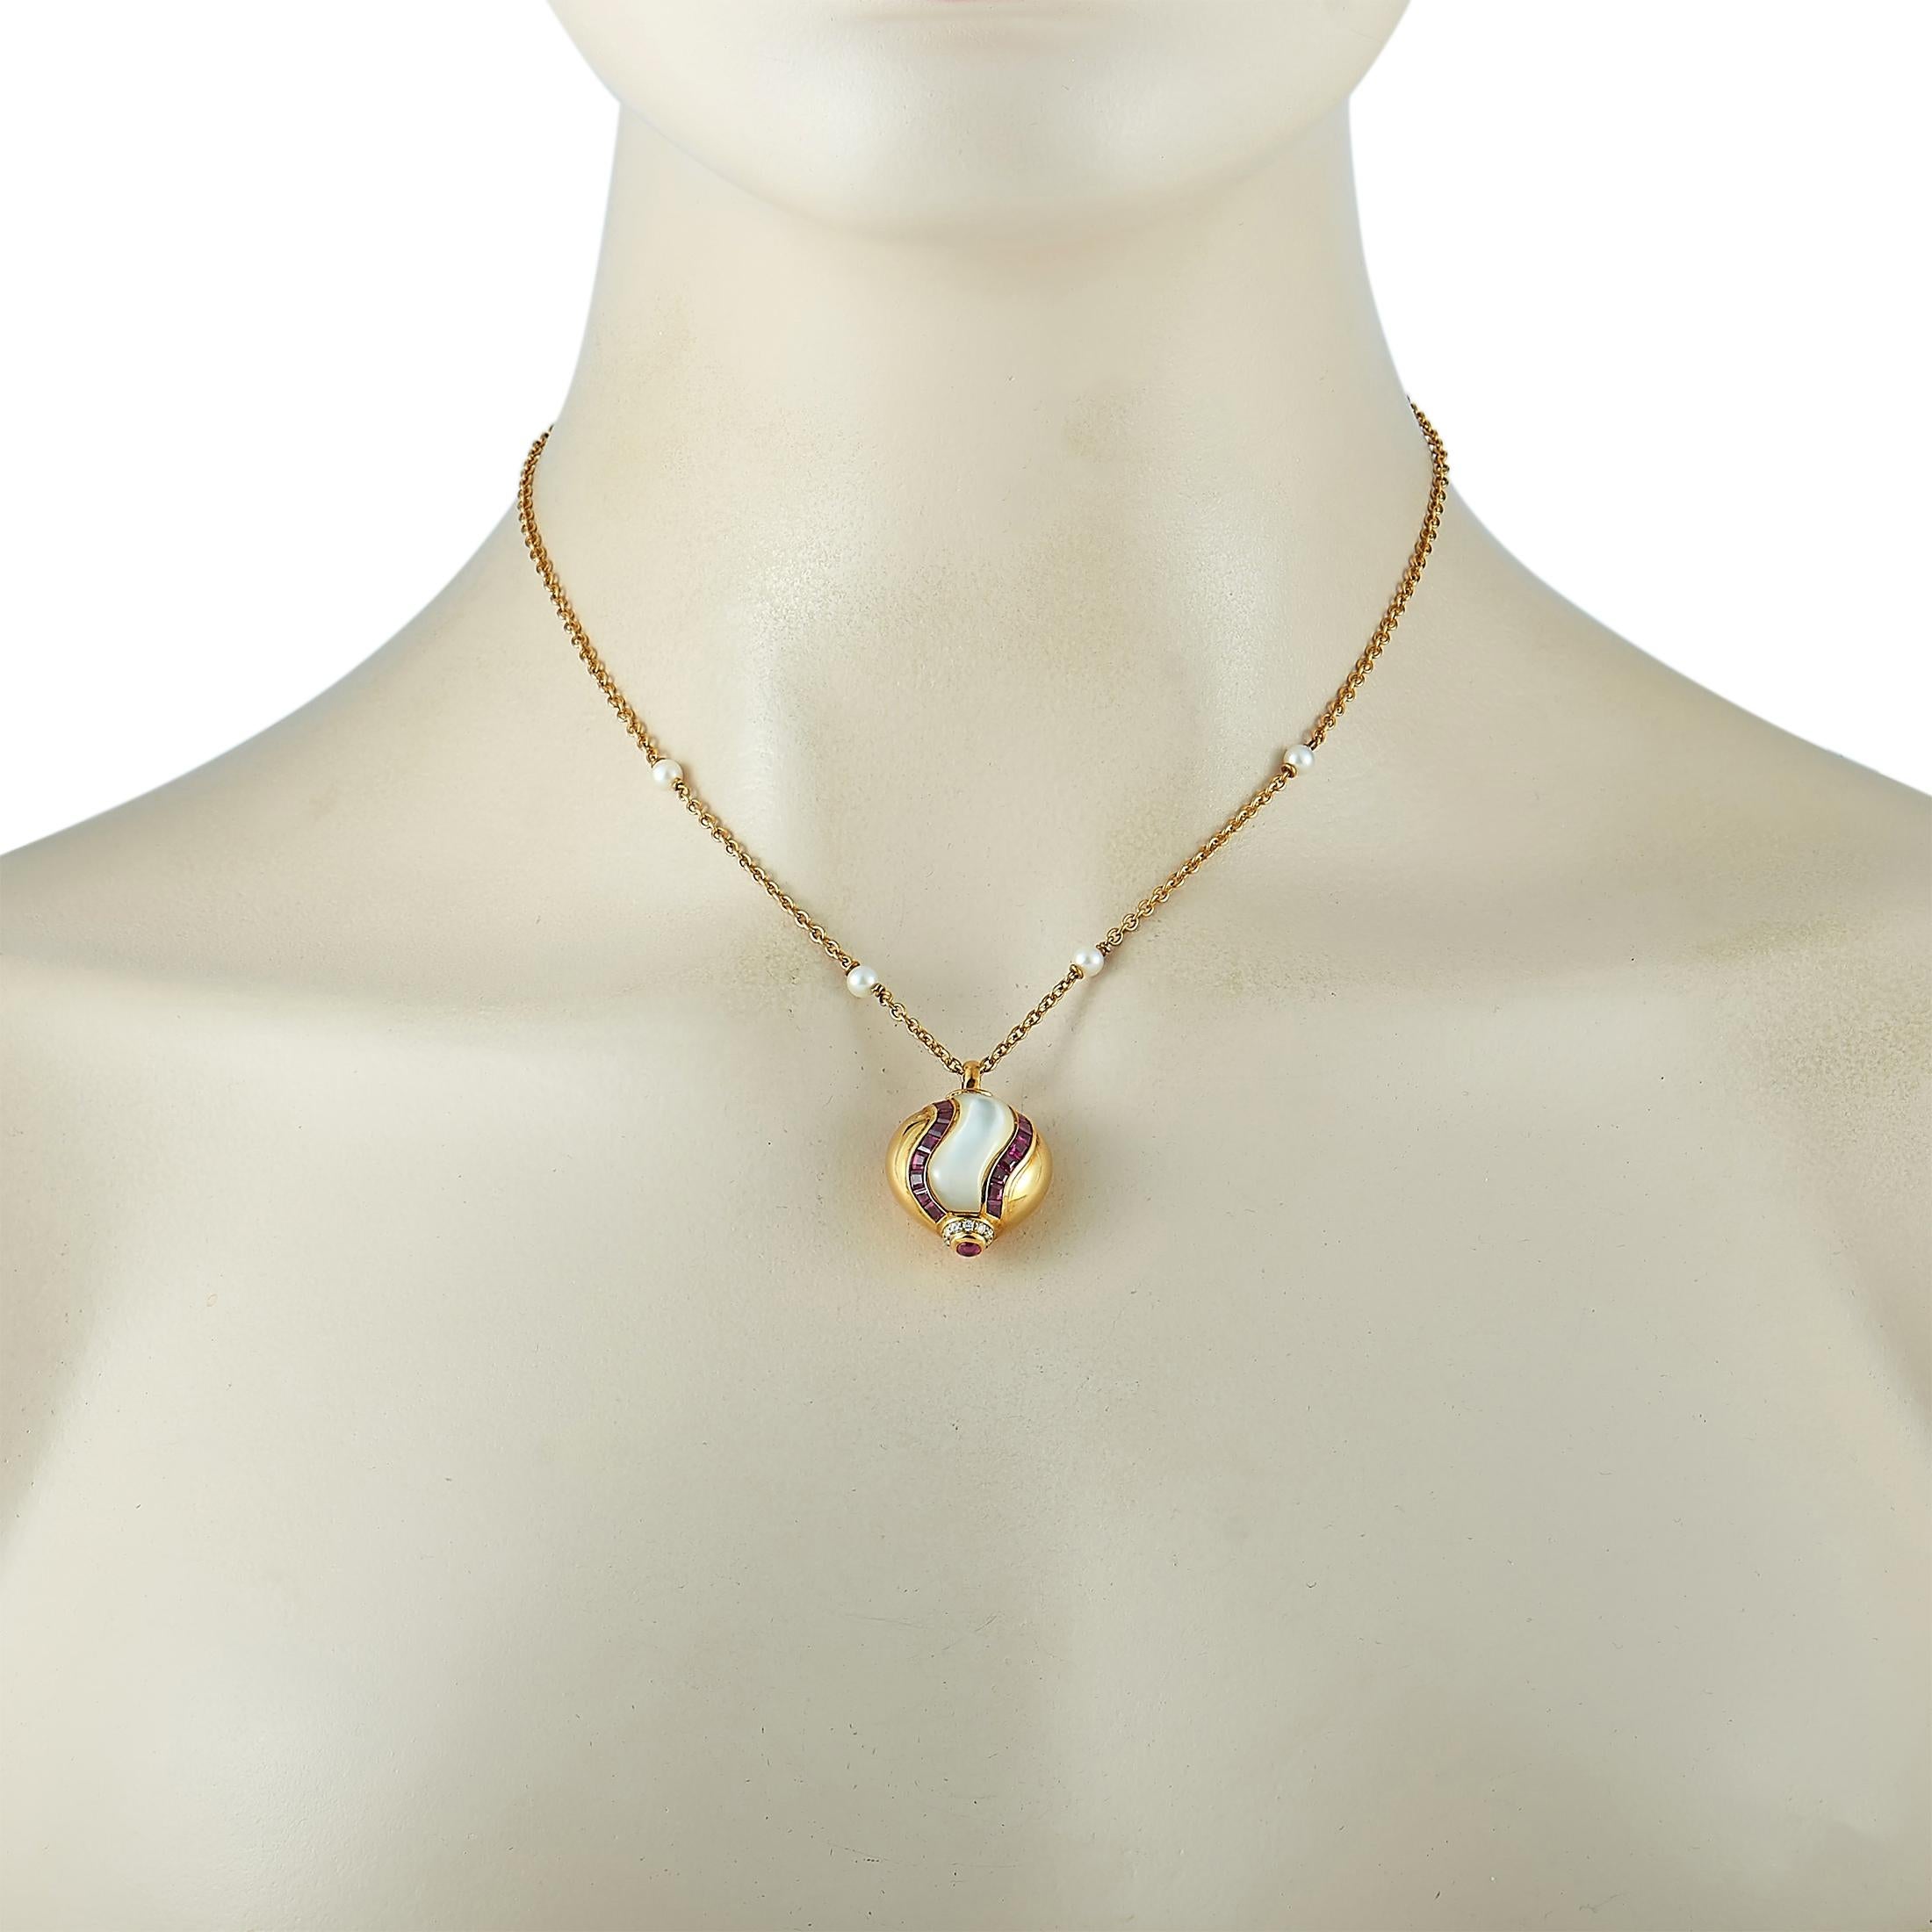 This Faraone Mennella necklace is crafted from 18K yellow gold and weighs 16 grams. It is presented with a 16” chain and a pendant that measures 1.10” in length and 0.75” in width. The necklace is embellished with pearls and with diamonds and rubies